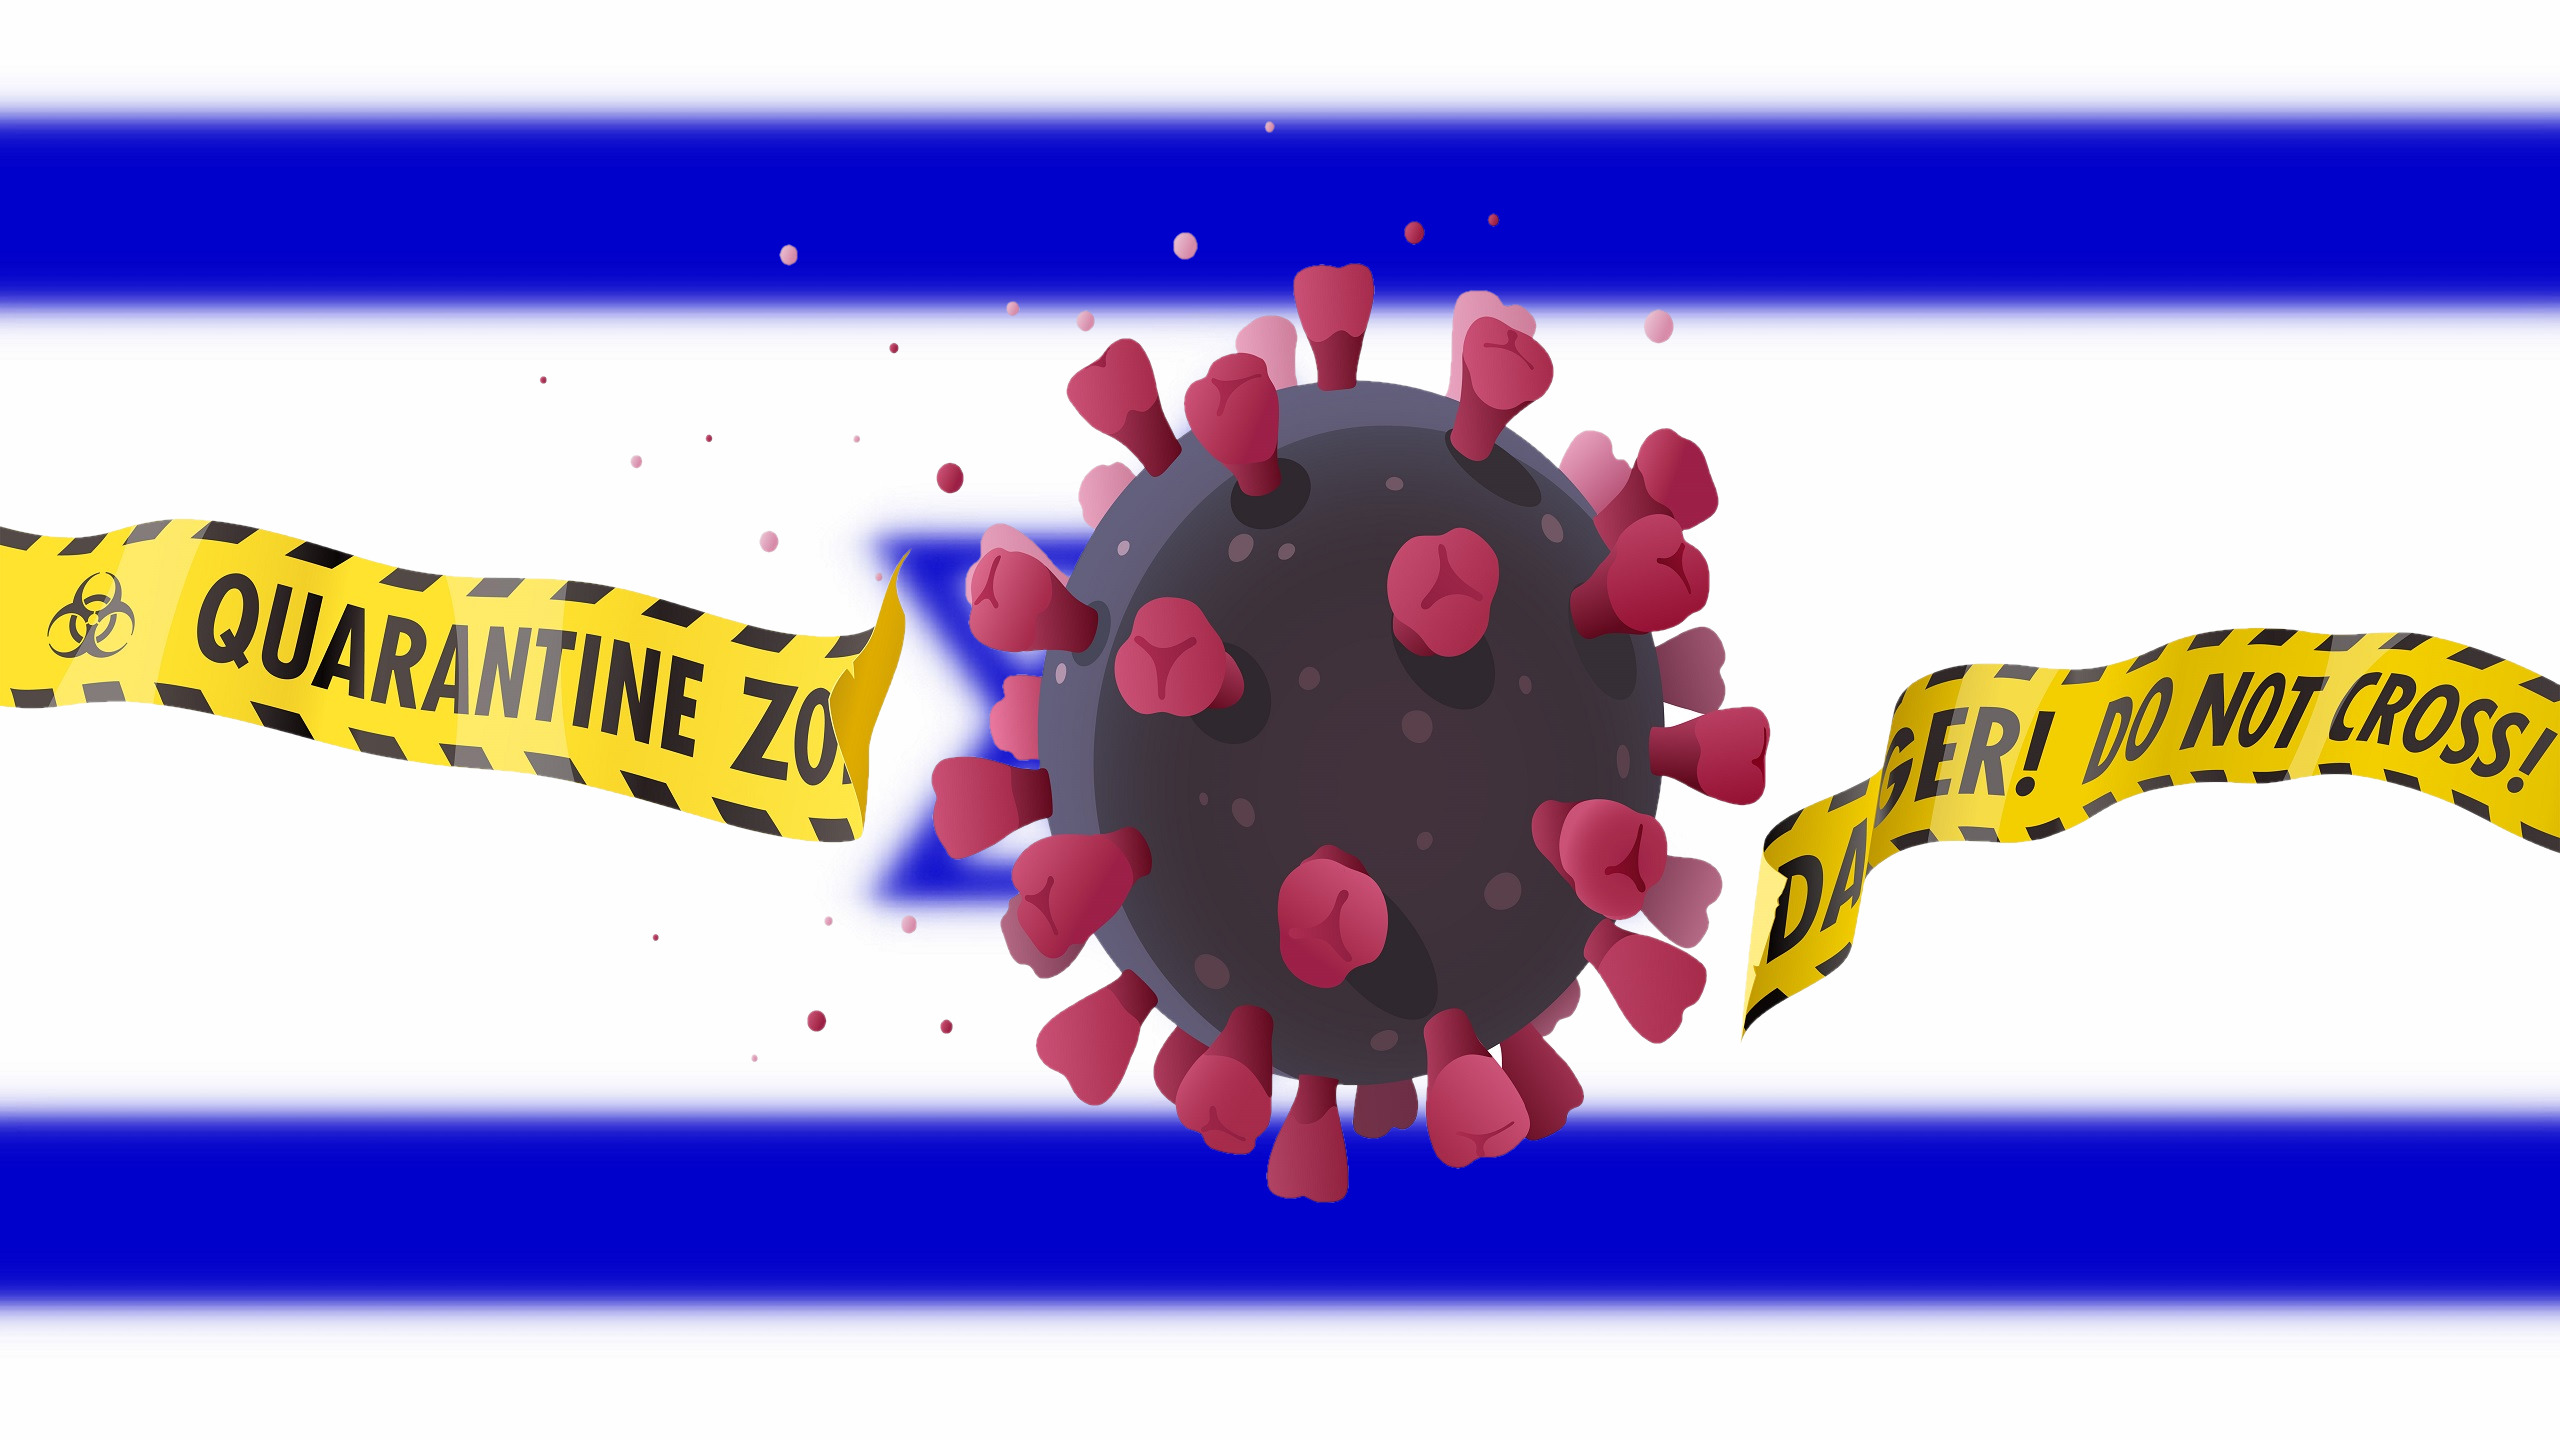 Israel’s Virus Spiraling Out Of Control, Gov’t Admits